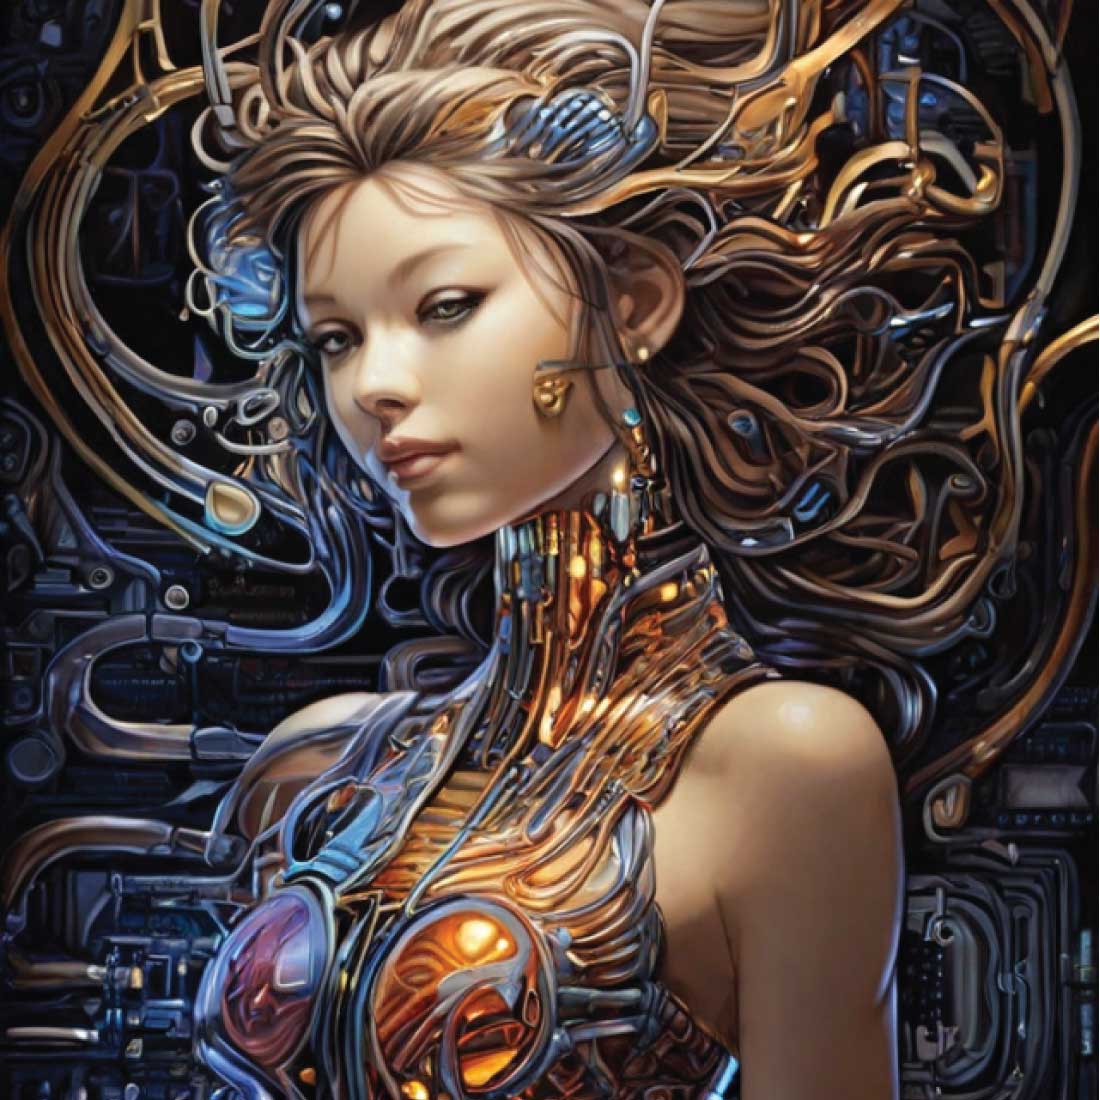 Cyborg Girl for T-shirts, Arts and Mobile back cover preview image.